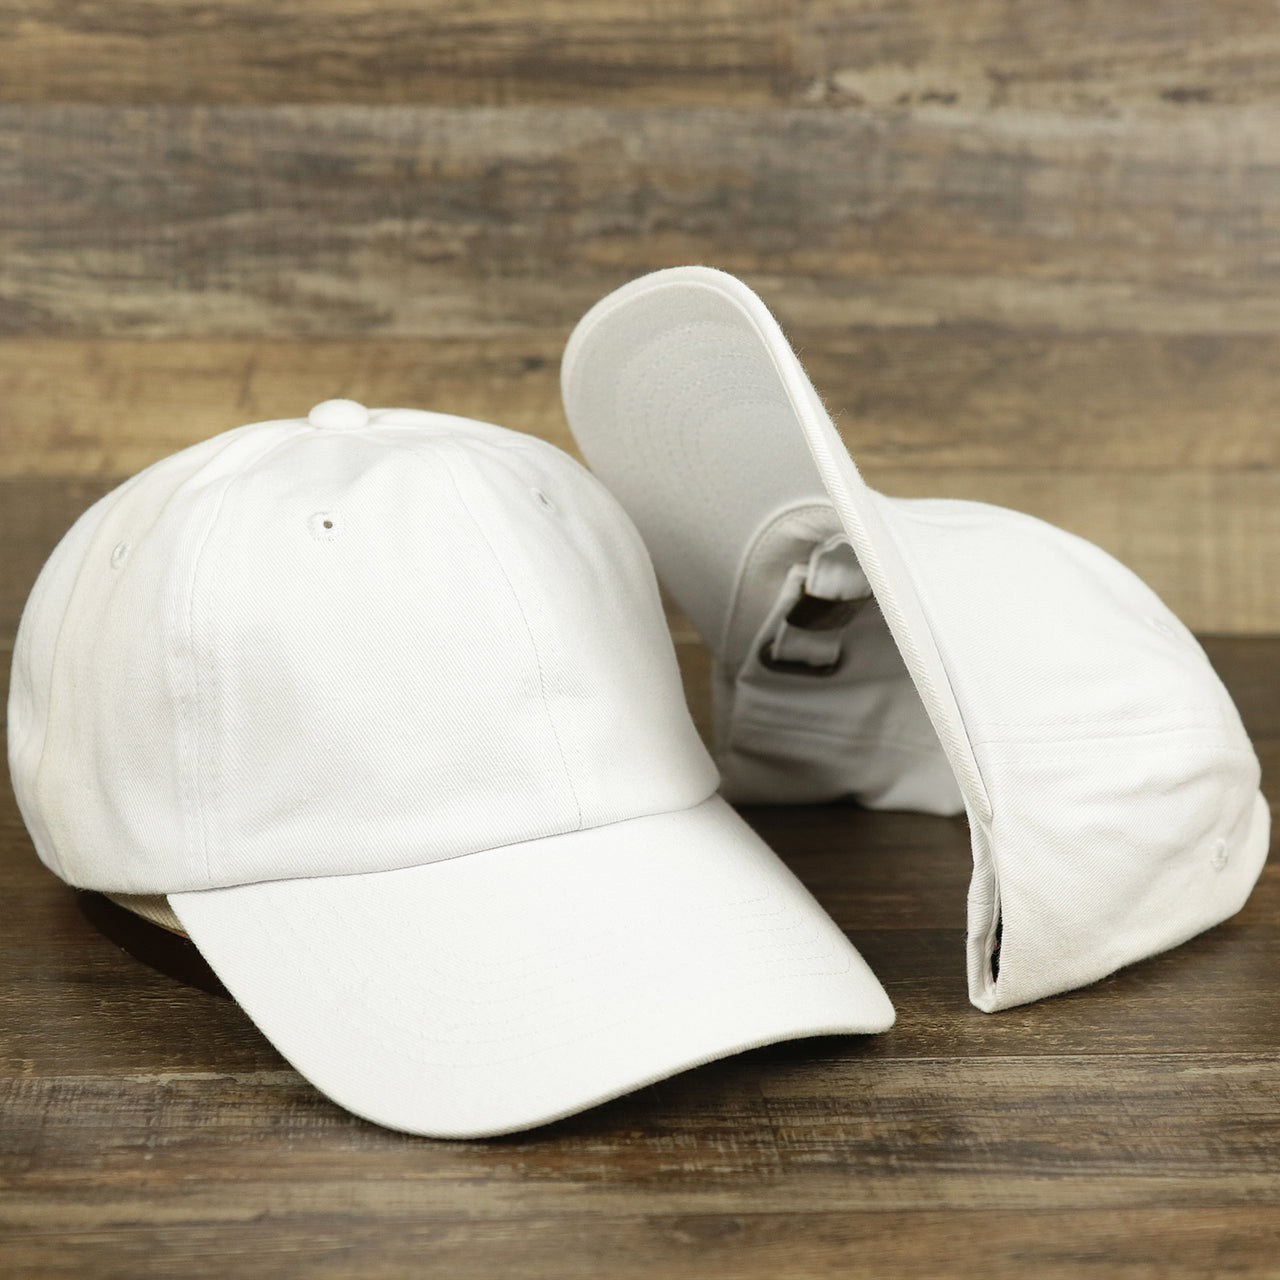 FOOT CLAN | DAD HAT | LINEN MATERIAL BLANK OSFM COTTON UNSTRUCTURED ADJUSTABLE, White, OSFM